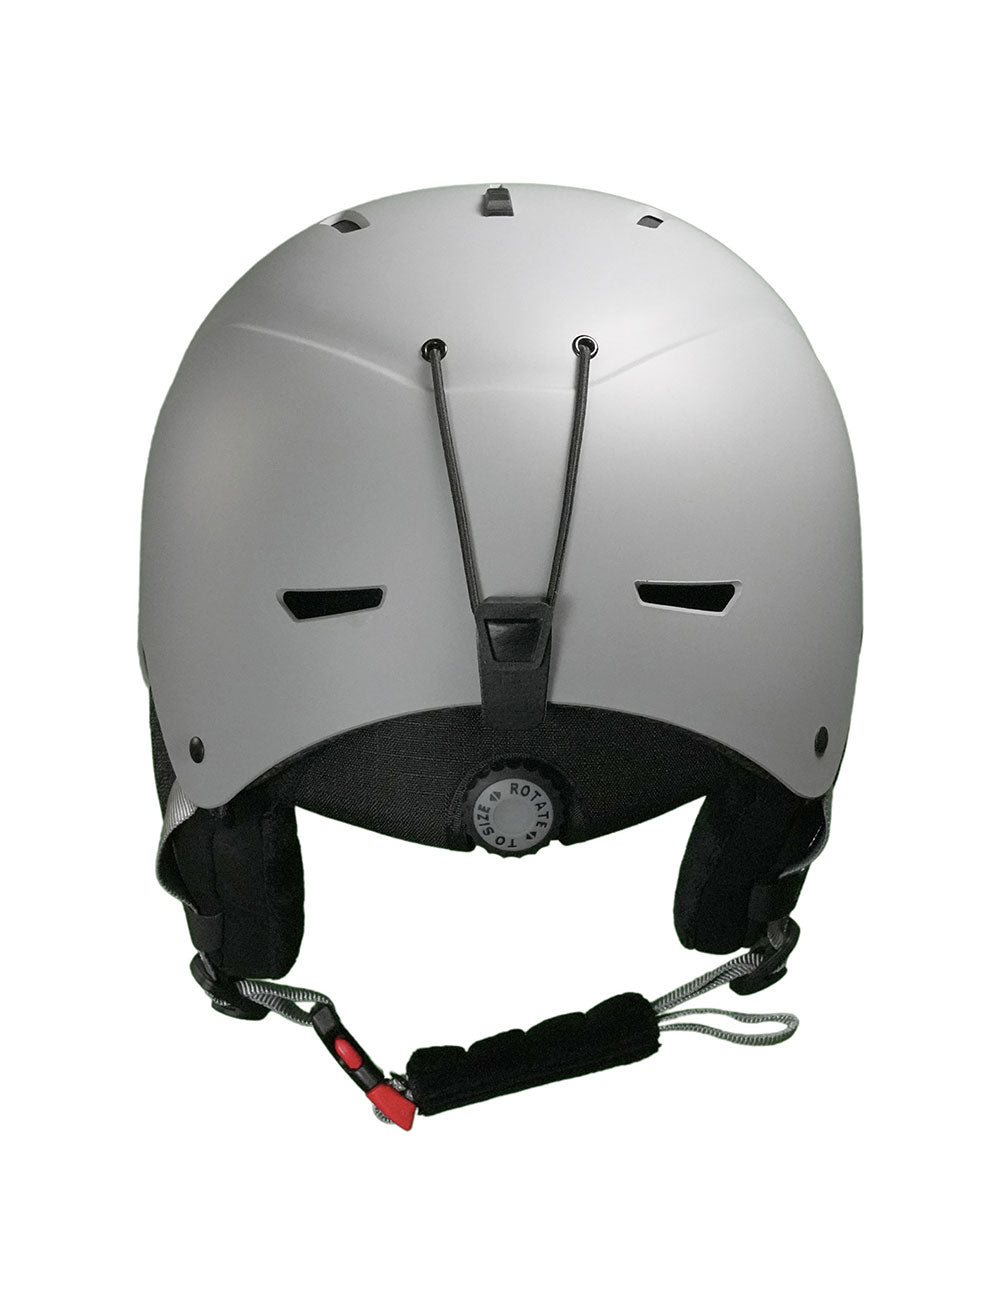 Strong_SB_Helm_sps2103_1300_2